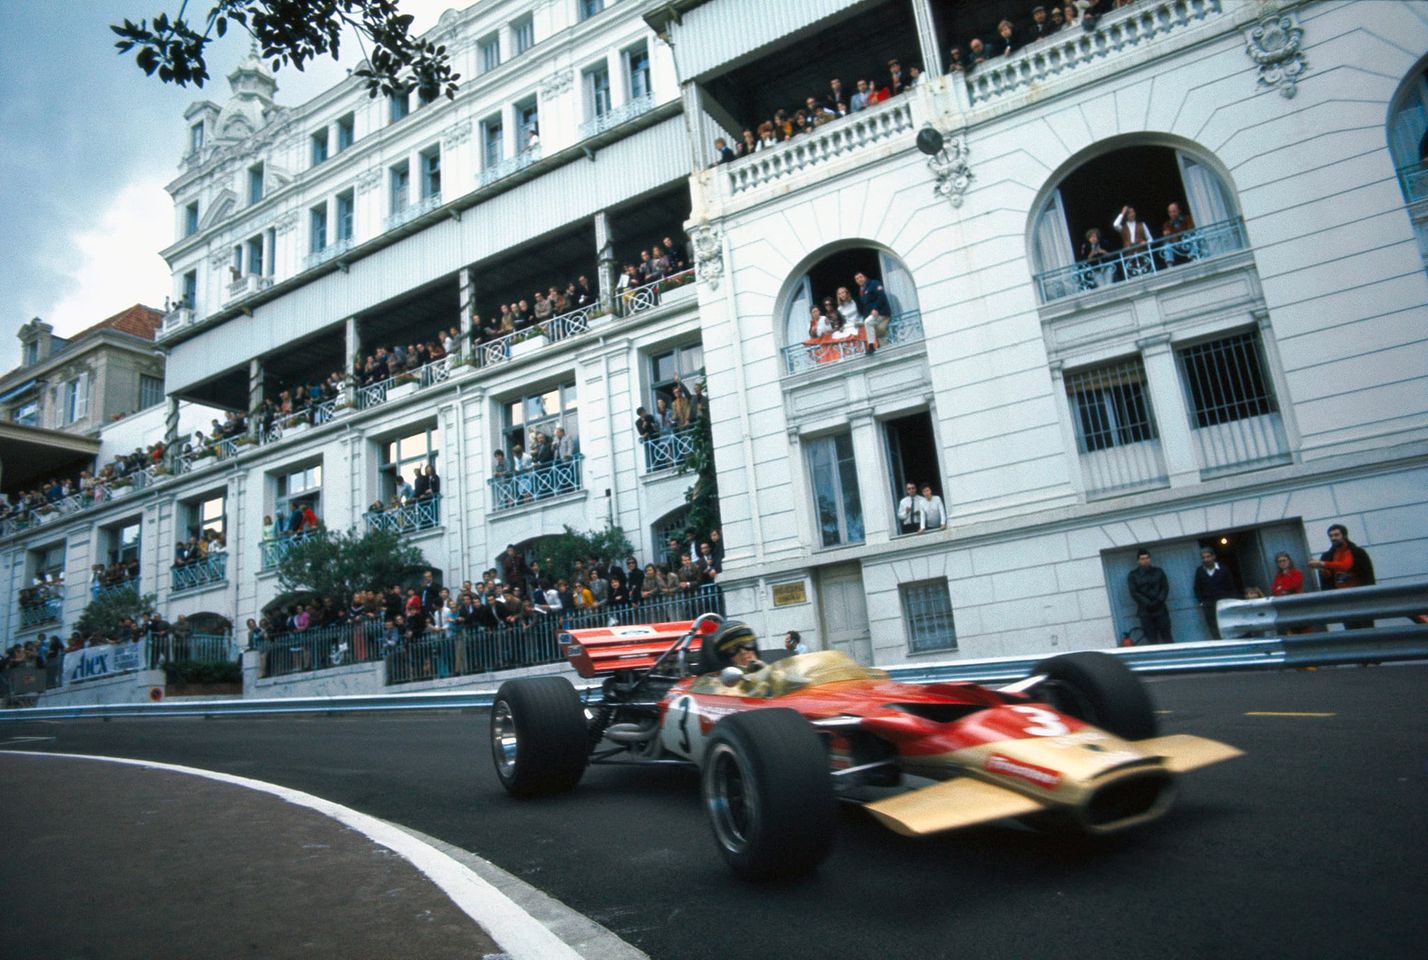 Jochen Rindt in the Lotus 49 on his way to win the Monaco GP on 10 May 1970.